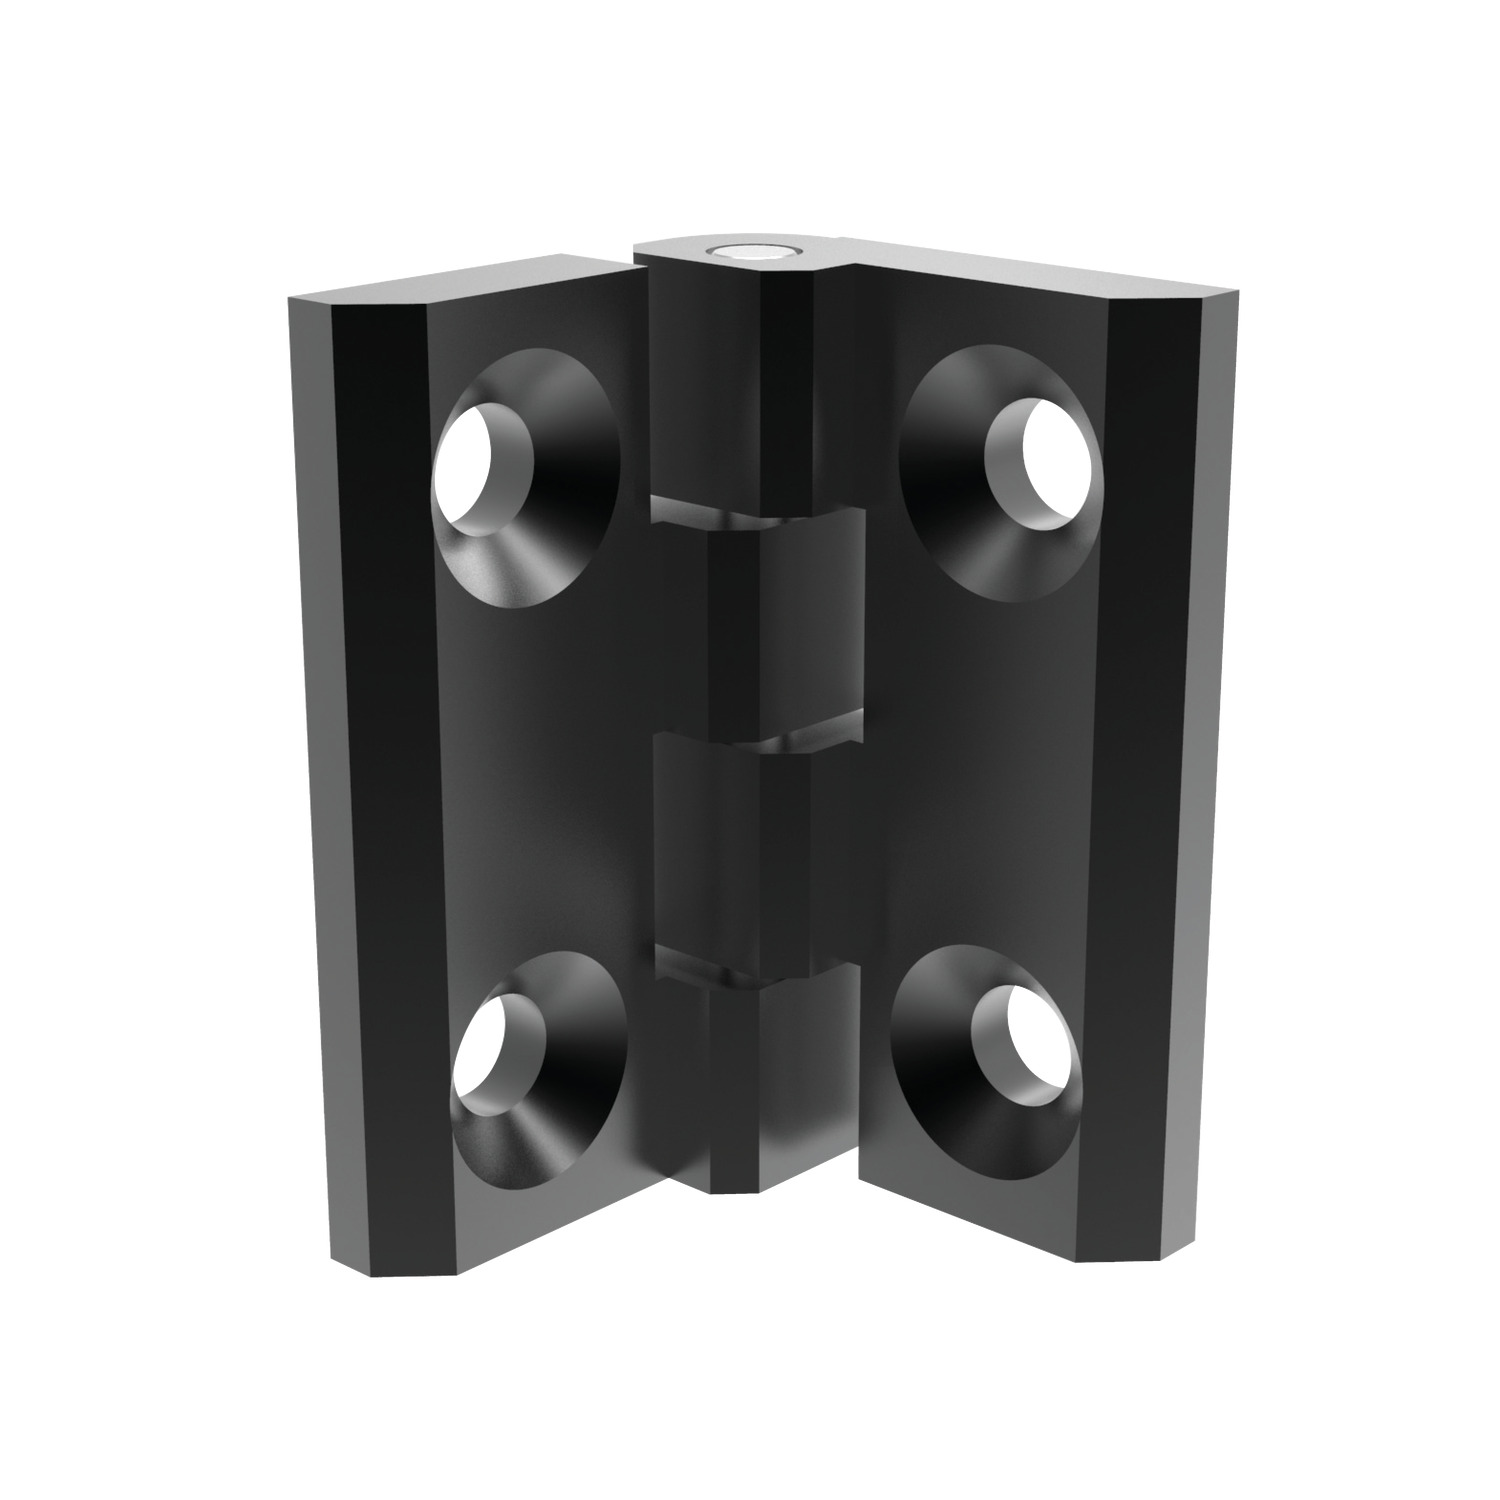 Surface Mount - Leaf Hinges Surface mount external hinges for plain/flush mounted doors as well as electrical panels and covers.